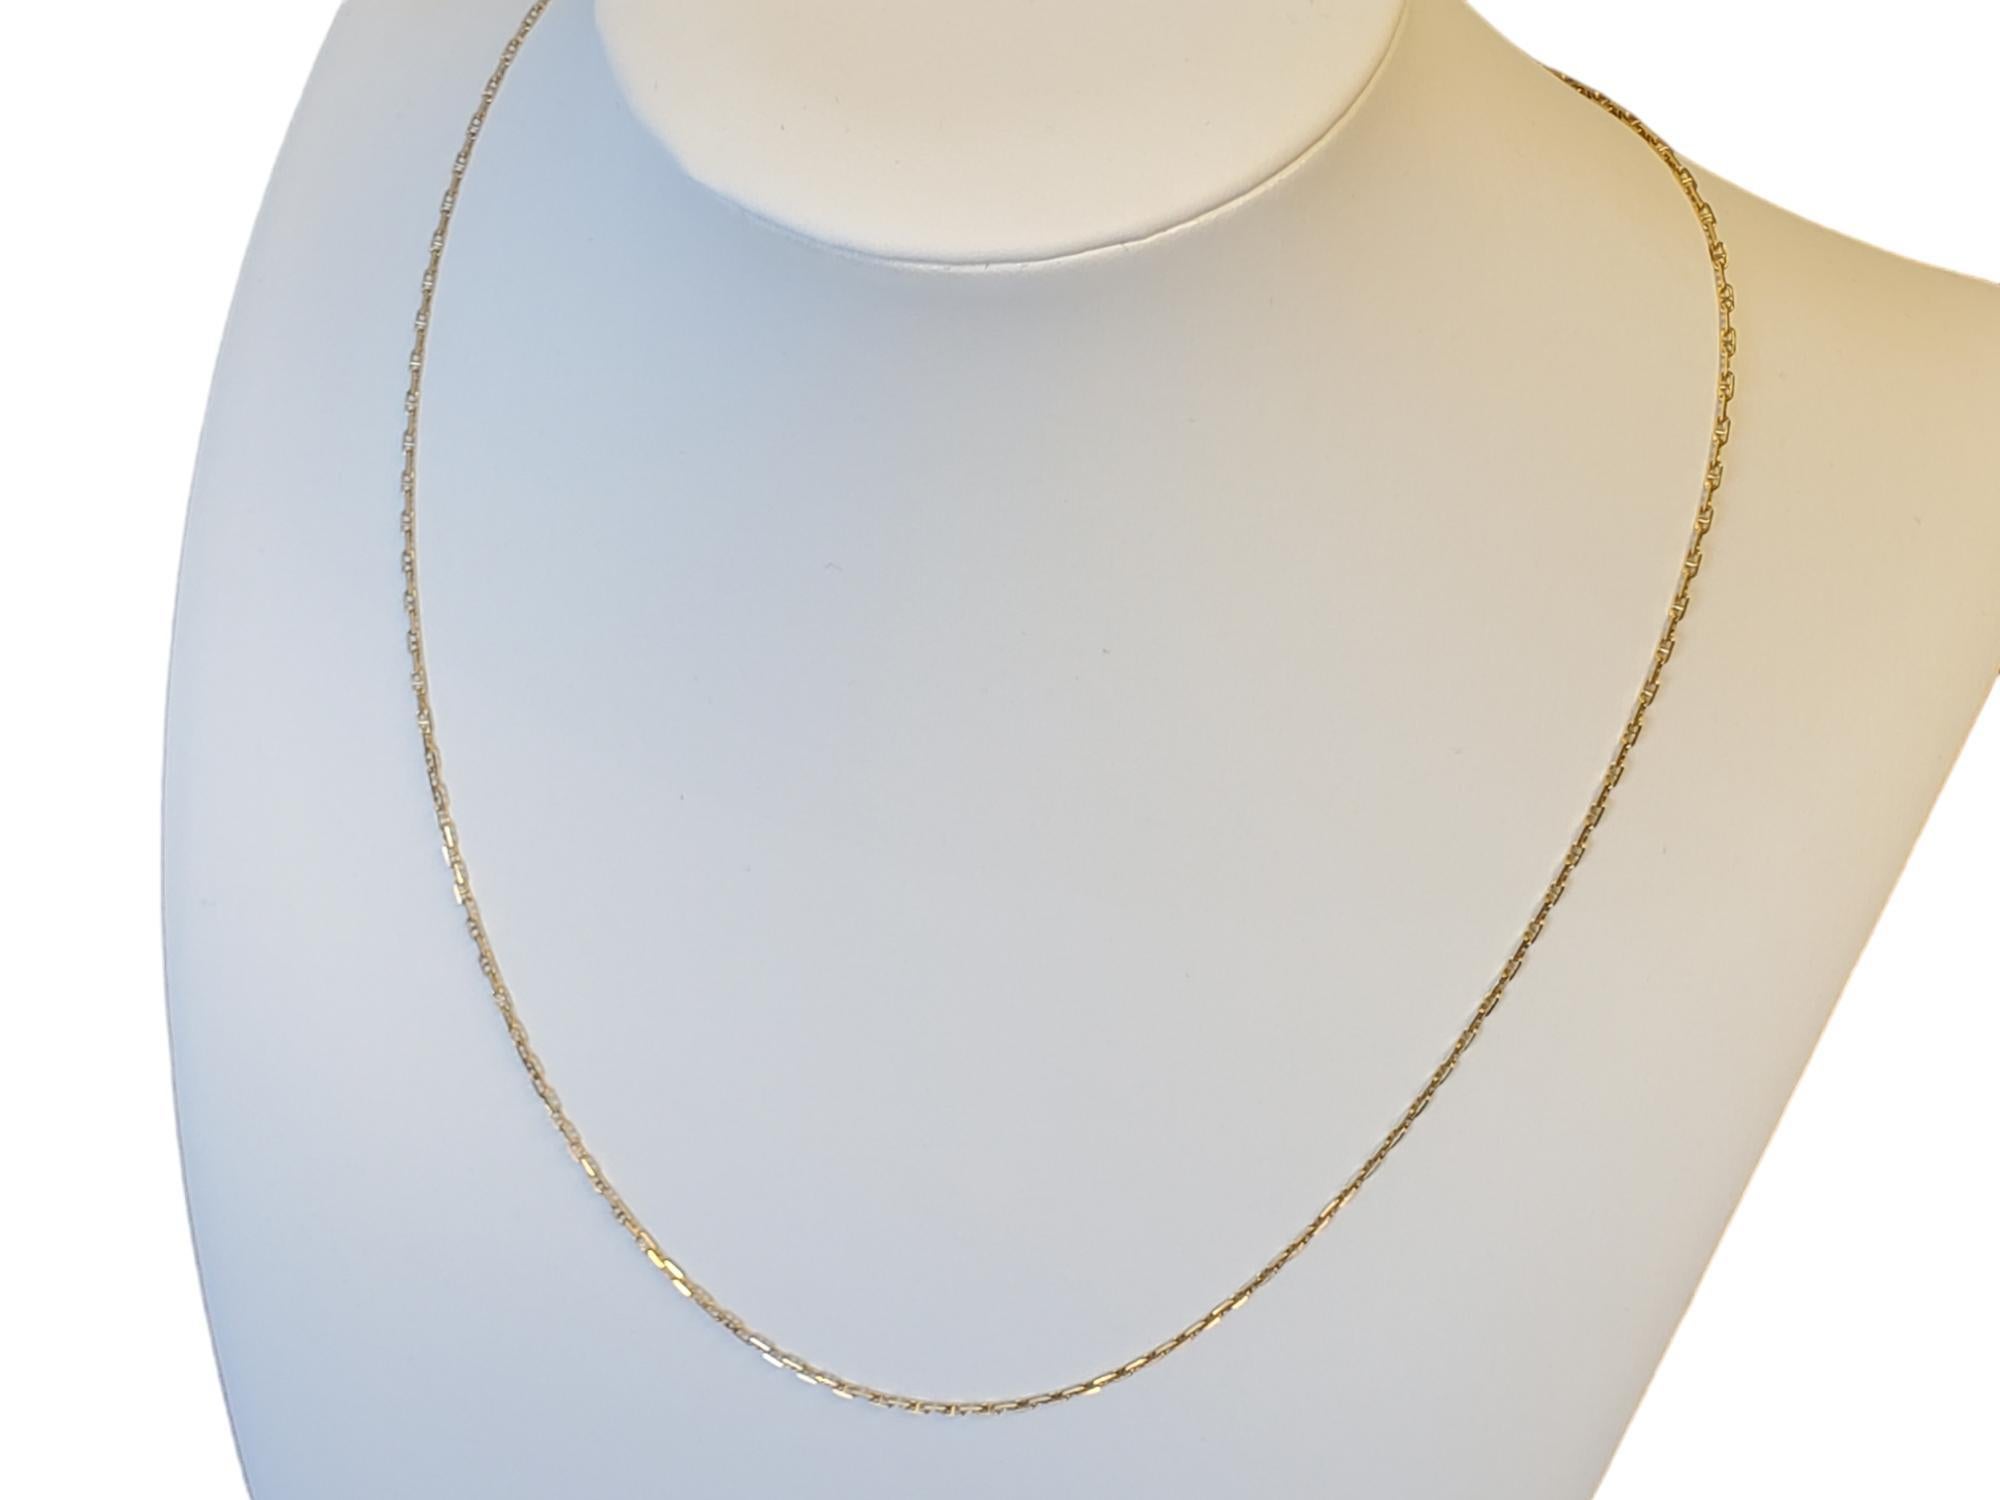 Vintage Italian 14k Chain Yellow Gold Stamped Link Necklace Minimalistic In Good Condition For Sale In Overland Park, KS